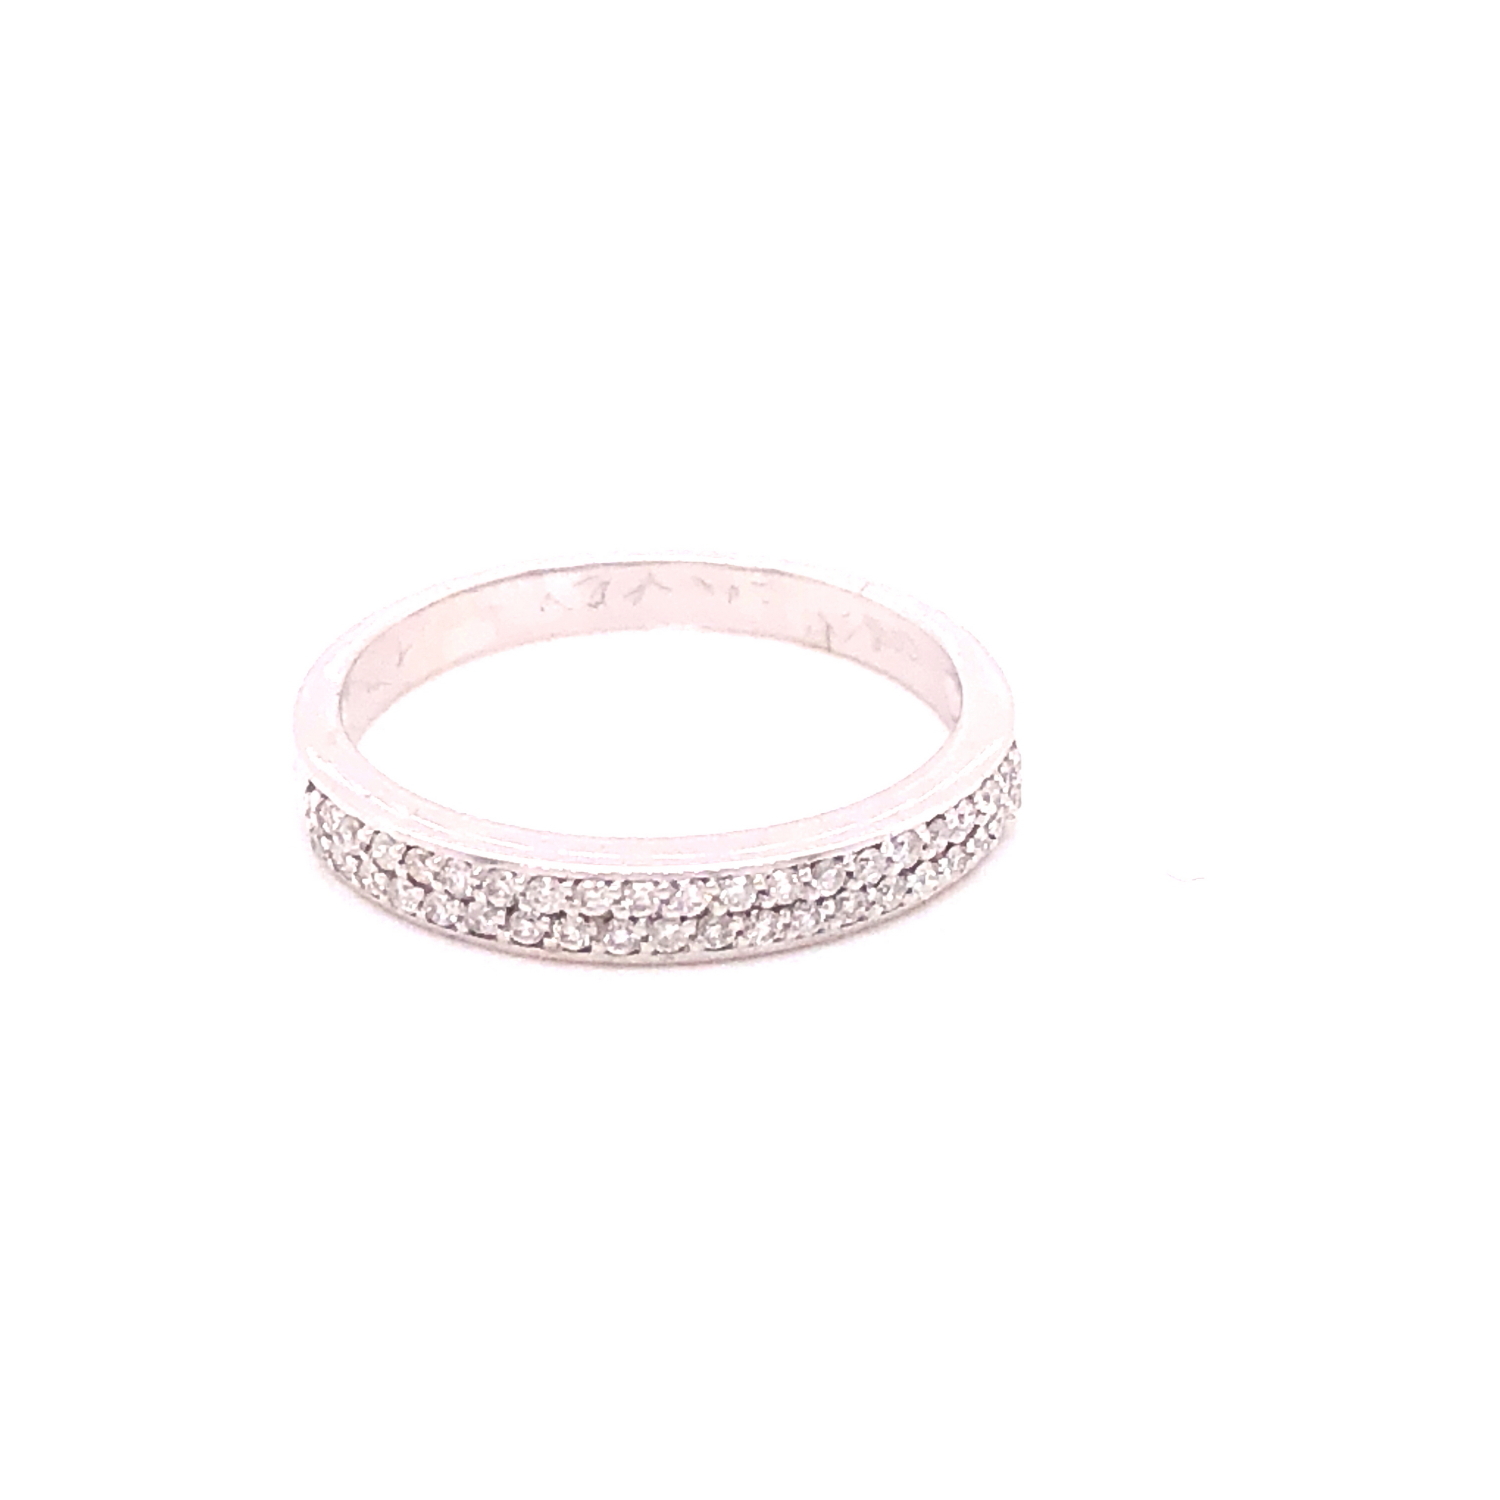 A 14ct WHITE GOLD TWO ROW DIAMOND SET HALF ETERNITY RING. FINGER SIZE M 1/2, GROSS WEIGHT 2.2grms. - Image 4 of 5